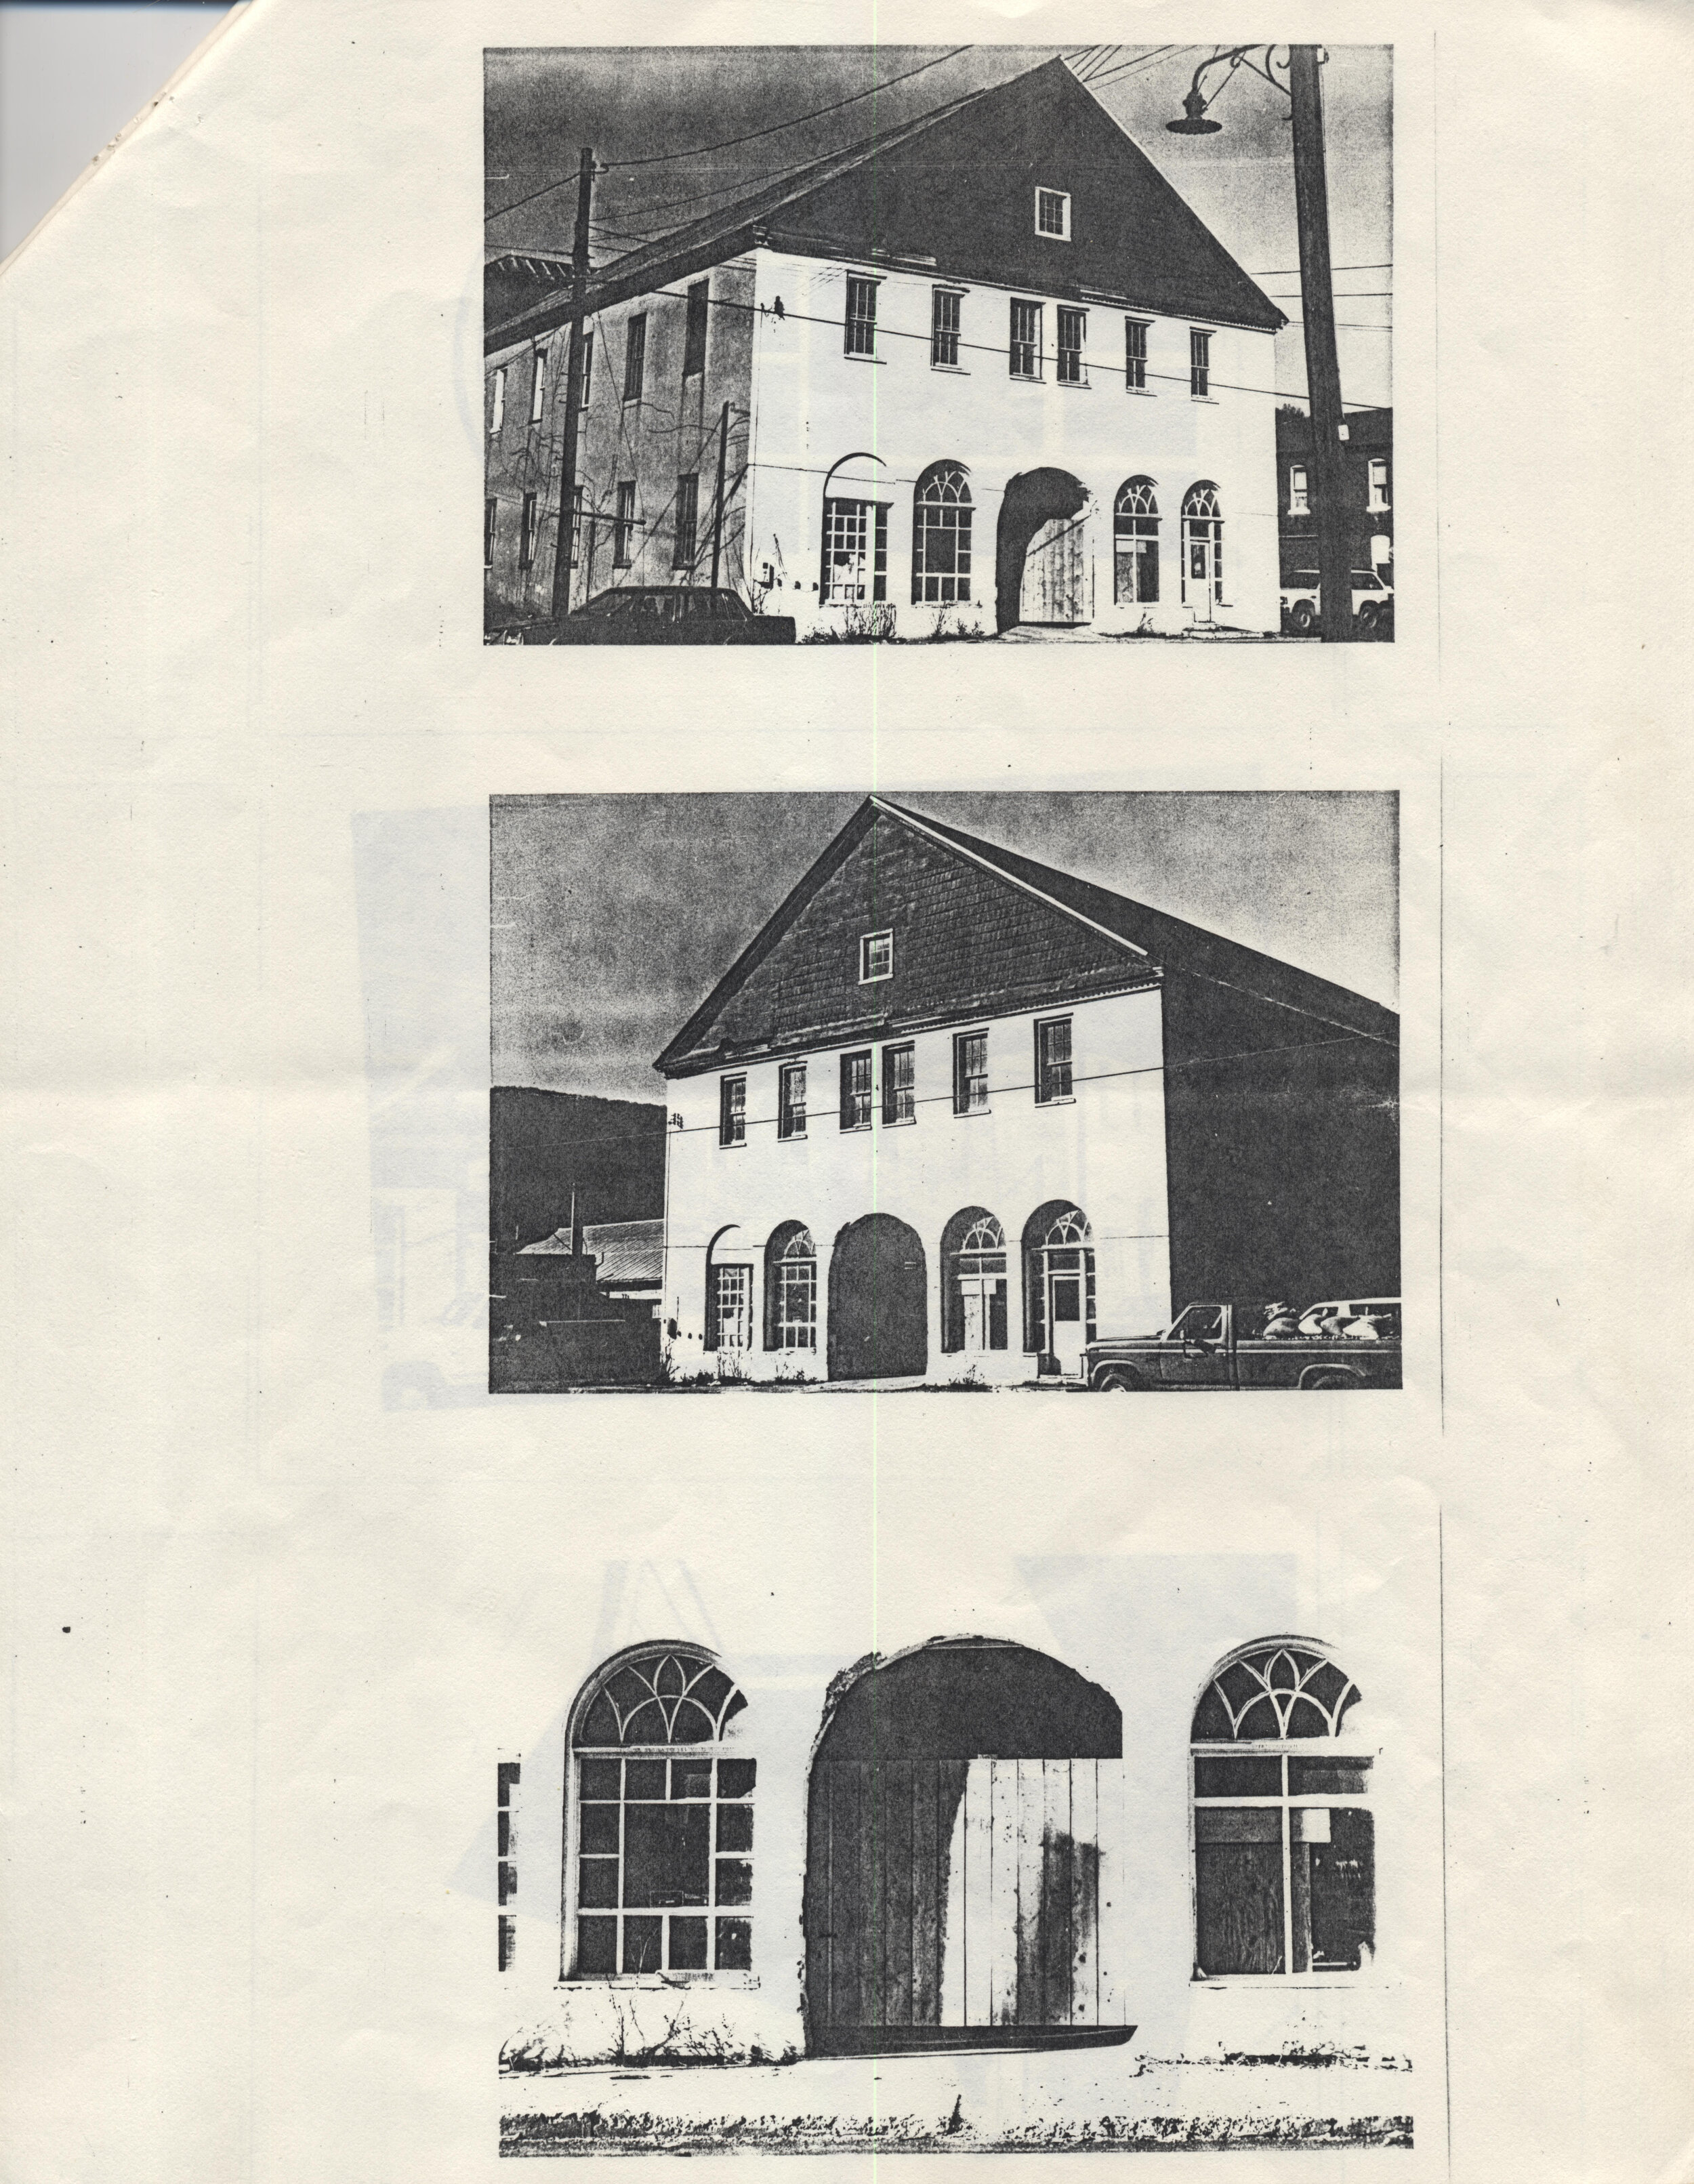 Marlinton Opera House Inspection Report Page 6.jpg